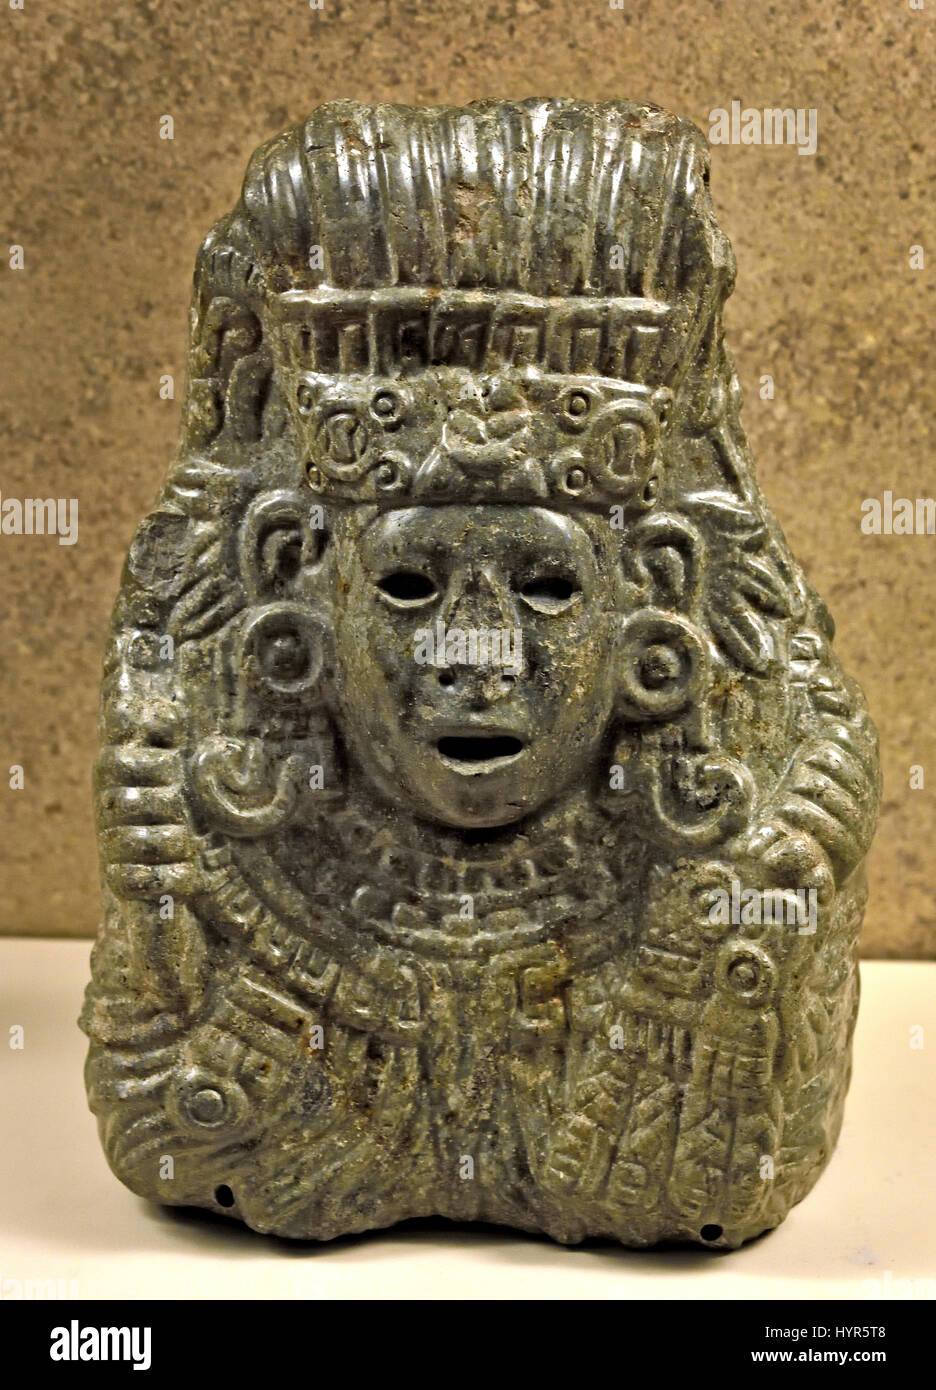 Aztec god Quetzalcoatl, the Feathered Serpent. The serpent's coils are covered with feathers Aztec 1325-1521 ,Mexico, ( The Mayans - Maya civilization was a Mesoamerican civilization in Yucatán  Mexico and Belize in Central America ( 2600 BC - 1500 AD ) Pre Columbian American ) Stock Photo